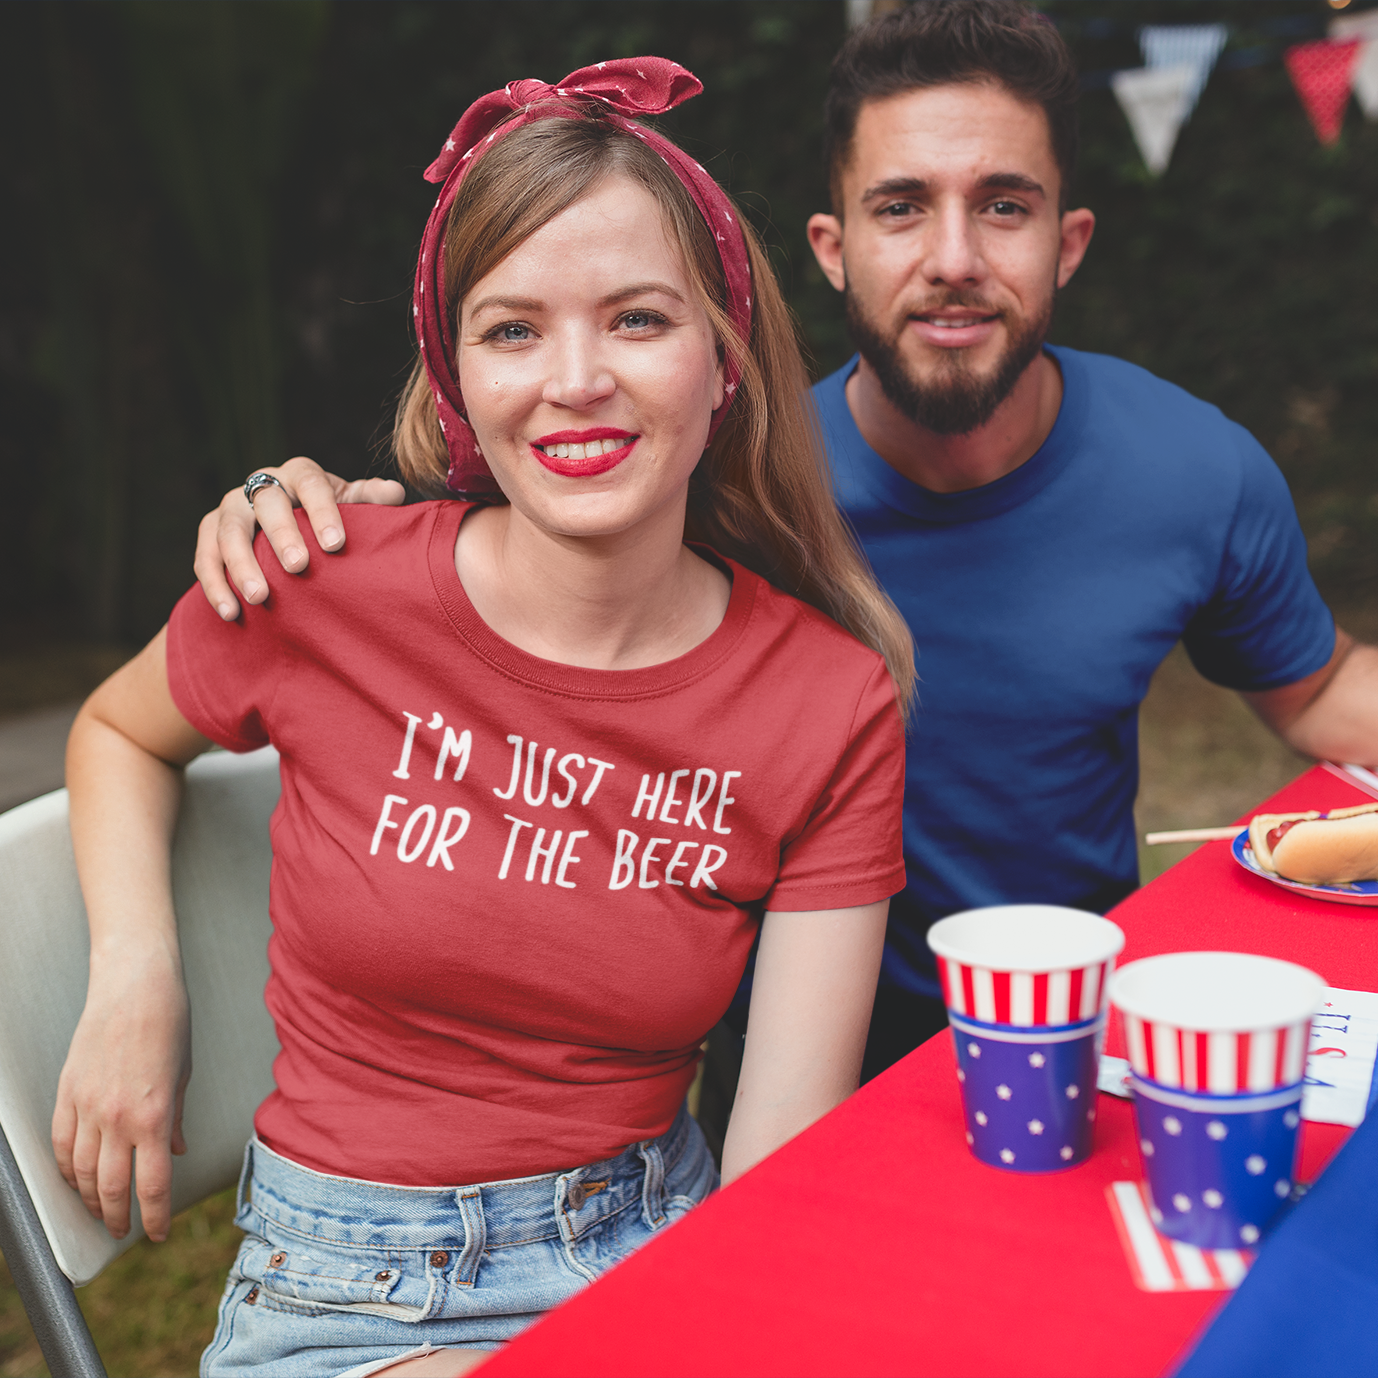 'I'm just here for the beer' adult shirt